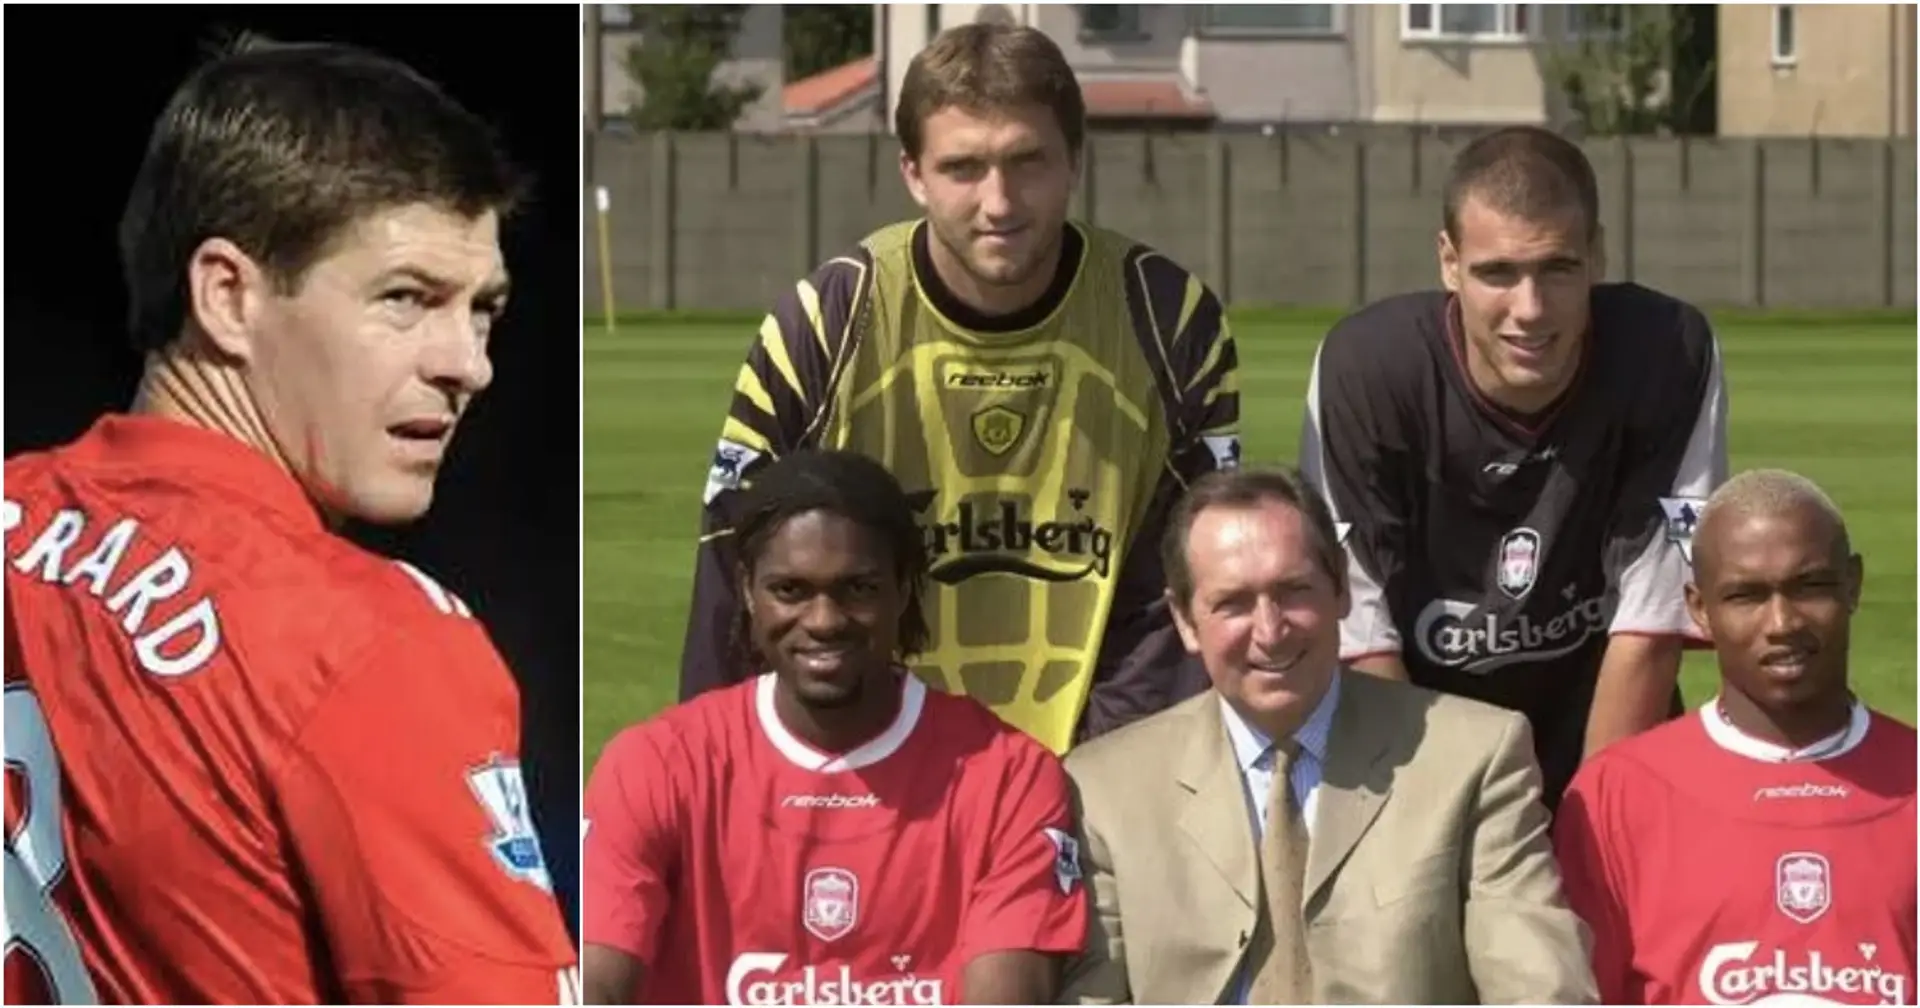 'Biggest waste of £18m in history': Gerrard names 3 worst signings - Houllier wanted them to win Premier League for Liverpool